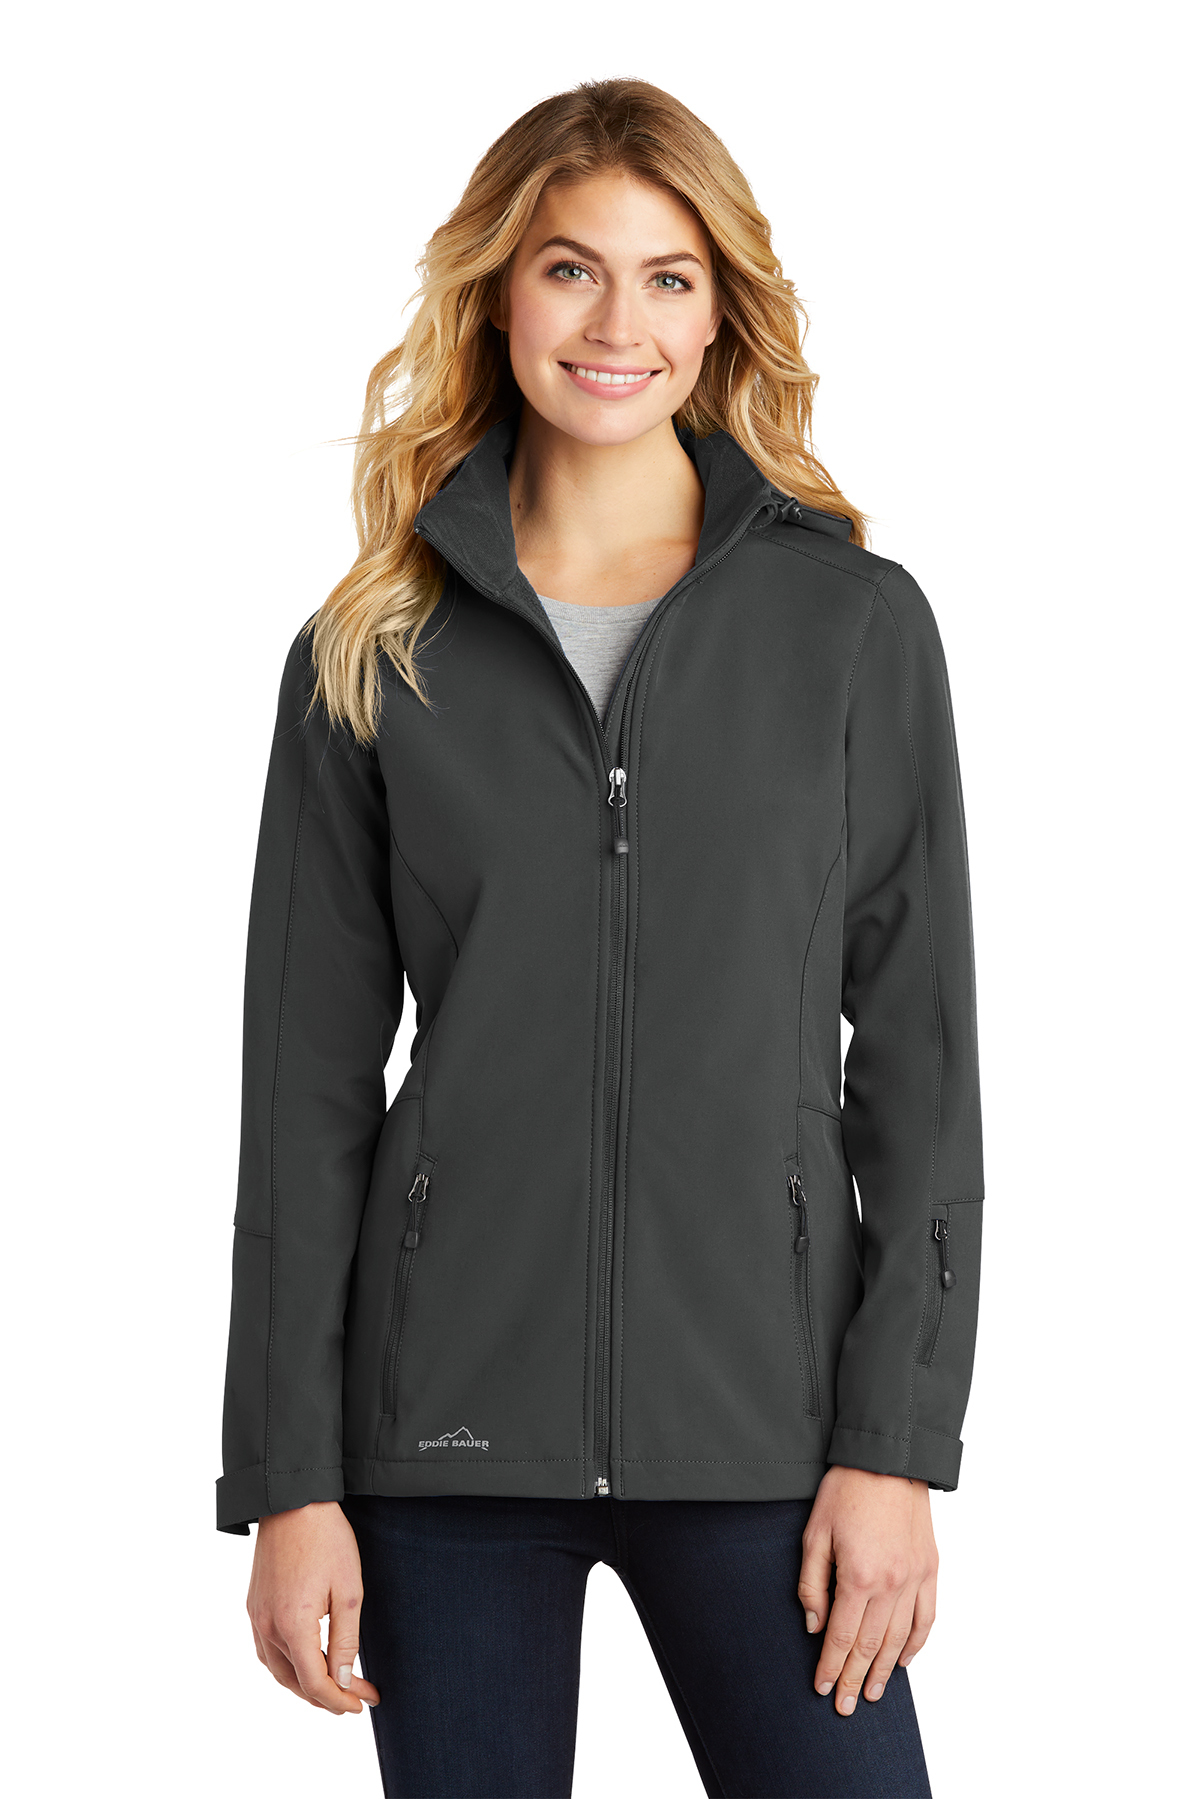 troosten Uitrusten kat Eddie Bauer Ladies Hooded Soft Shell Parka | Product | Company Casuals